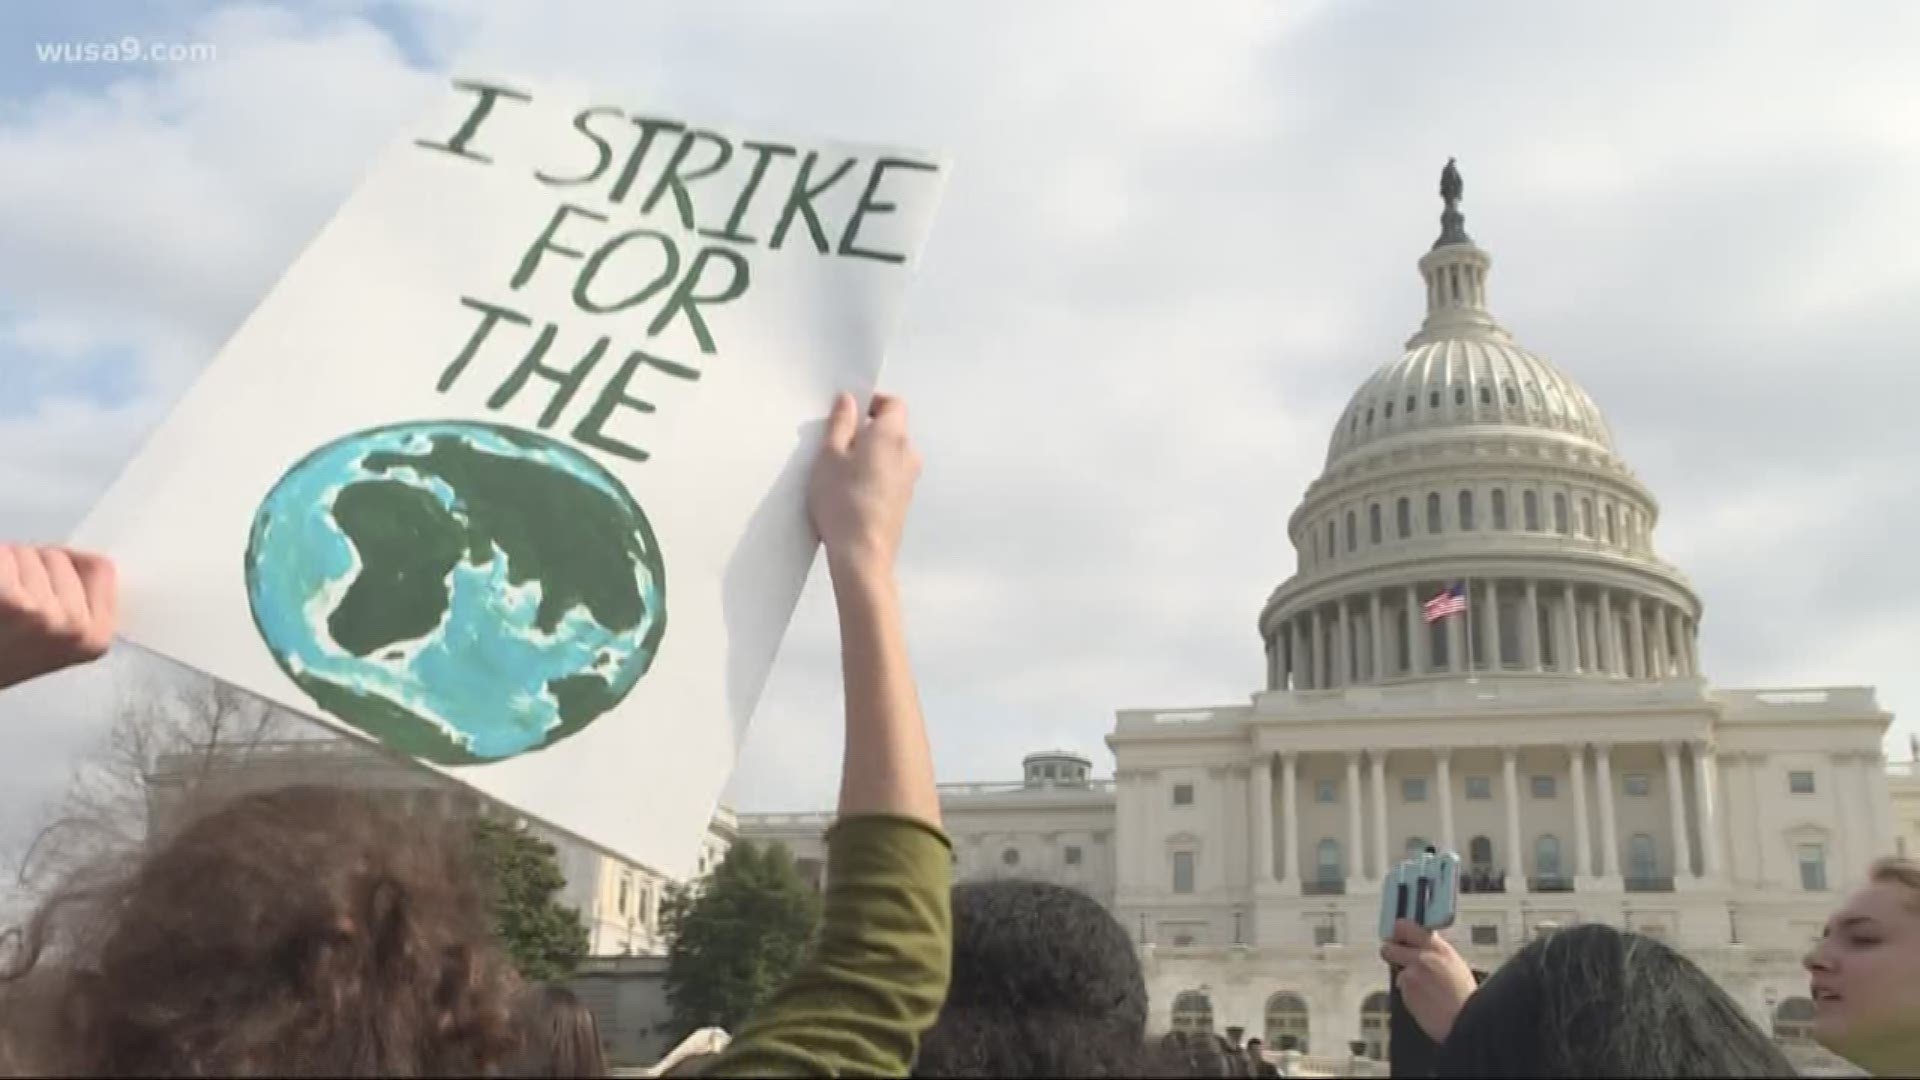 DC joined more than 100 US cities and other countries in the Youth Climate Strike this afternoon.